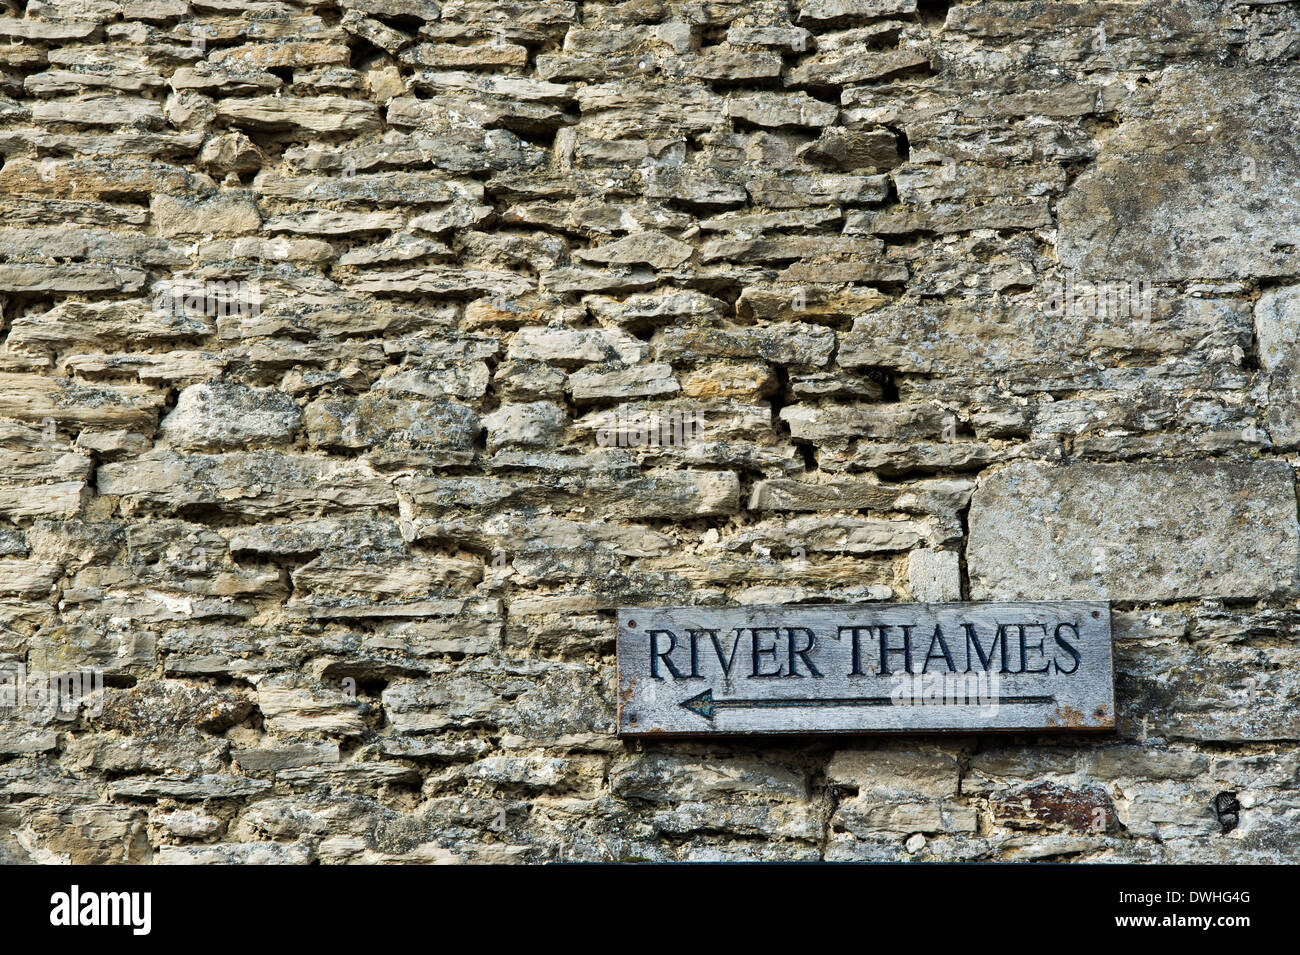 River Thames sign on a stone wall in Lechlade, Cotswolds, Gloucestershire, England Stock Photo